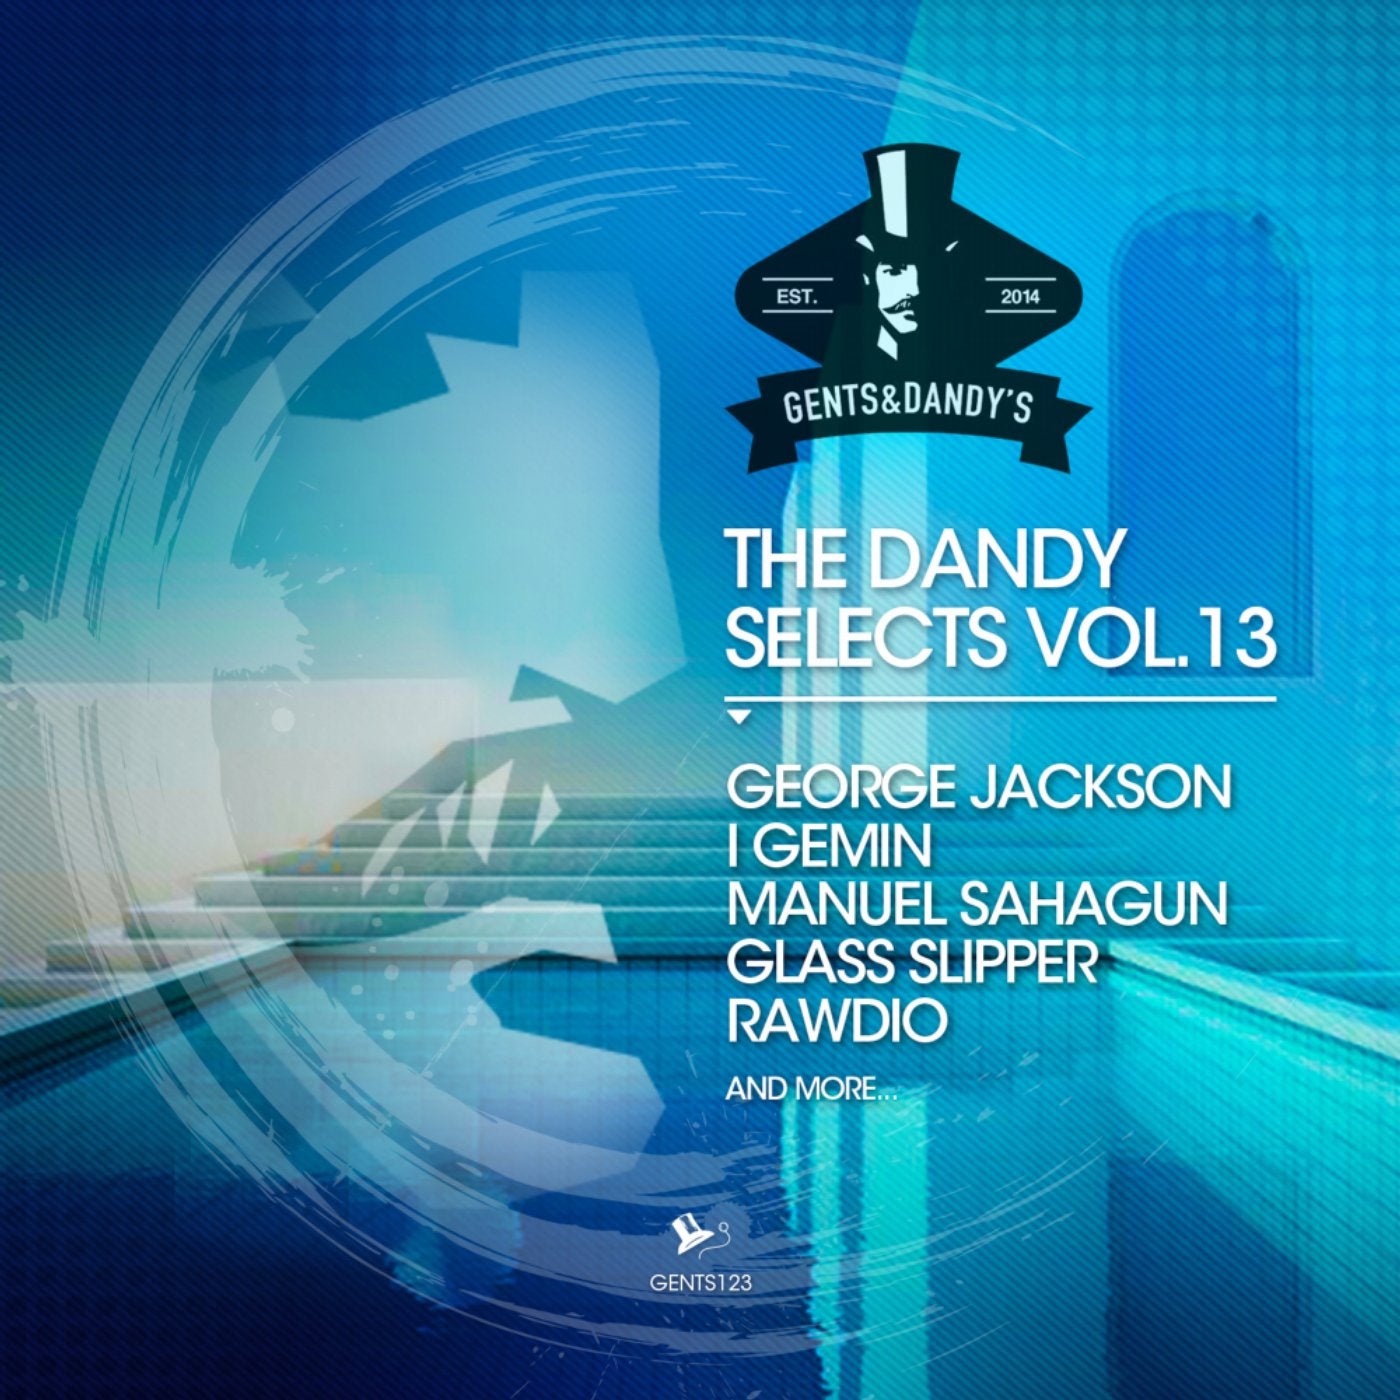 The Dandy Selects Vol. 13